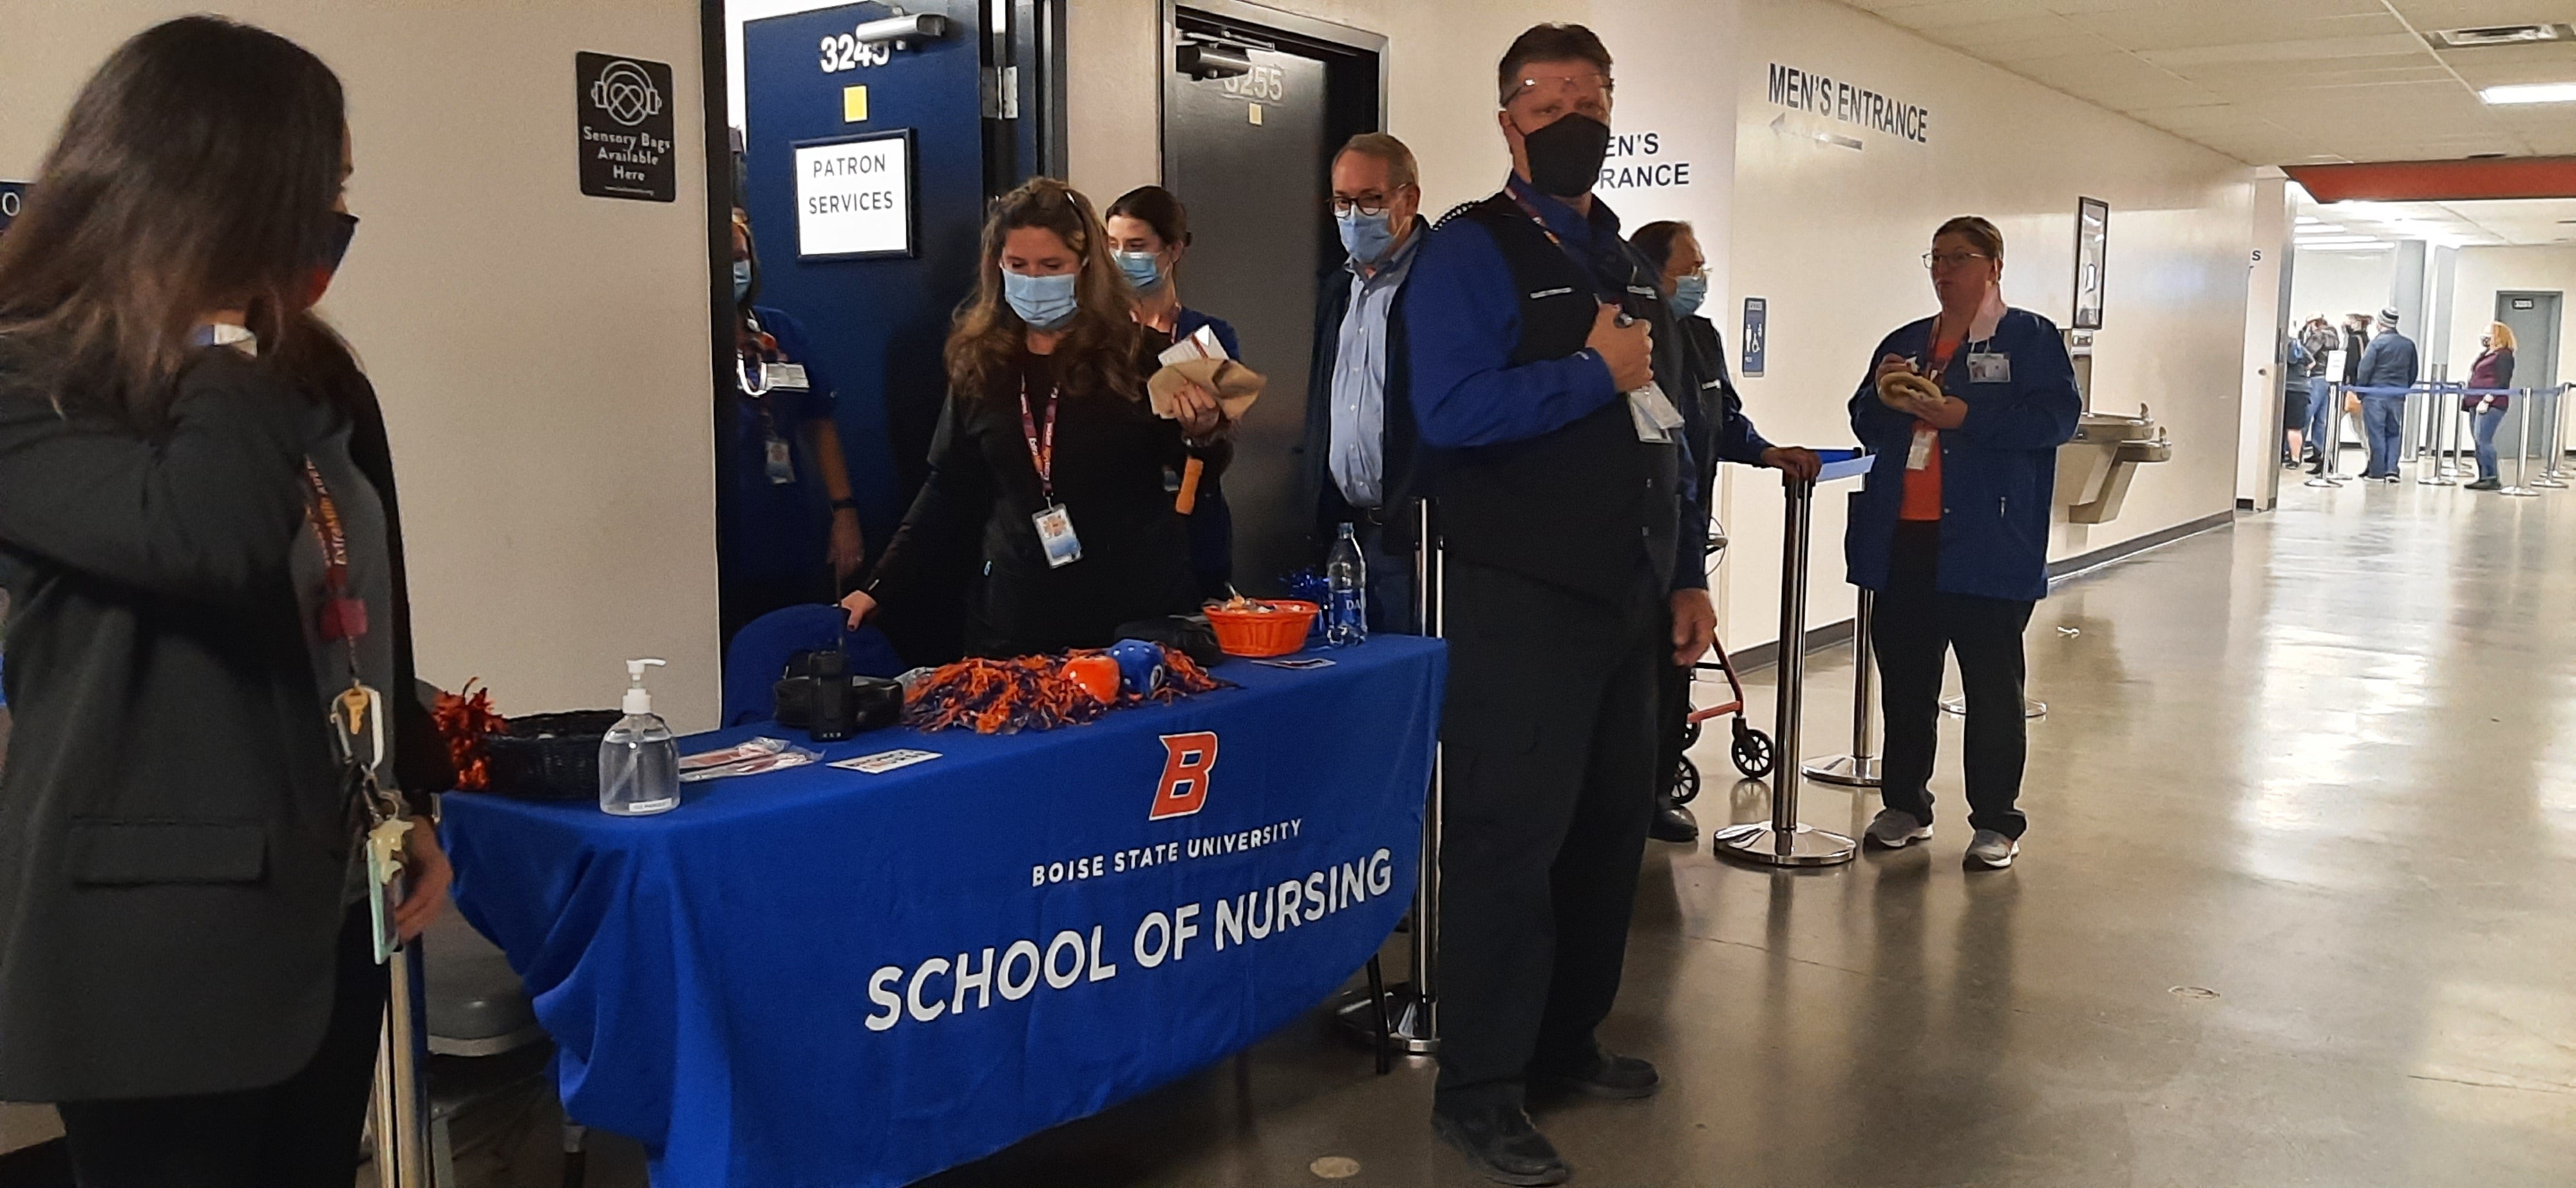 Boise State School of Nursing has partnered with ExtraMile Arena to provide First Aid support